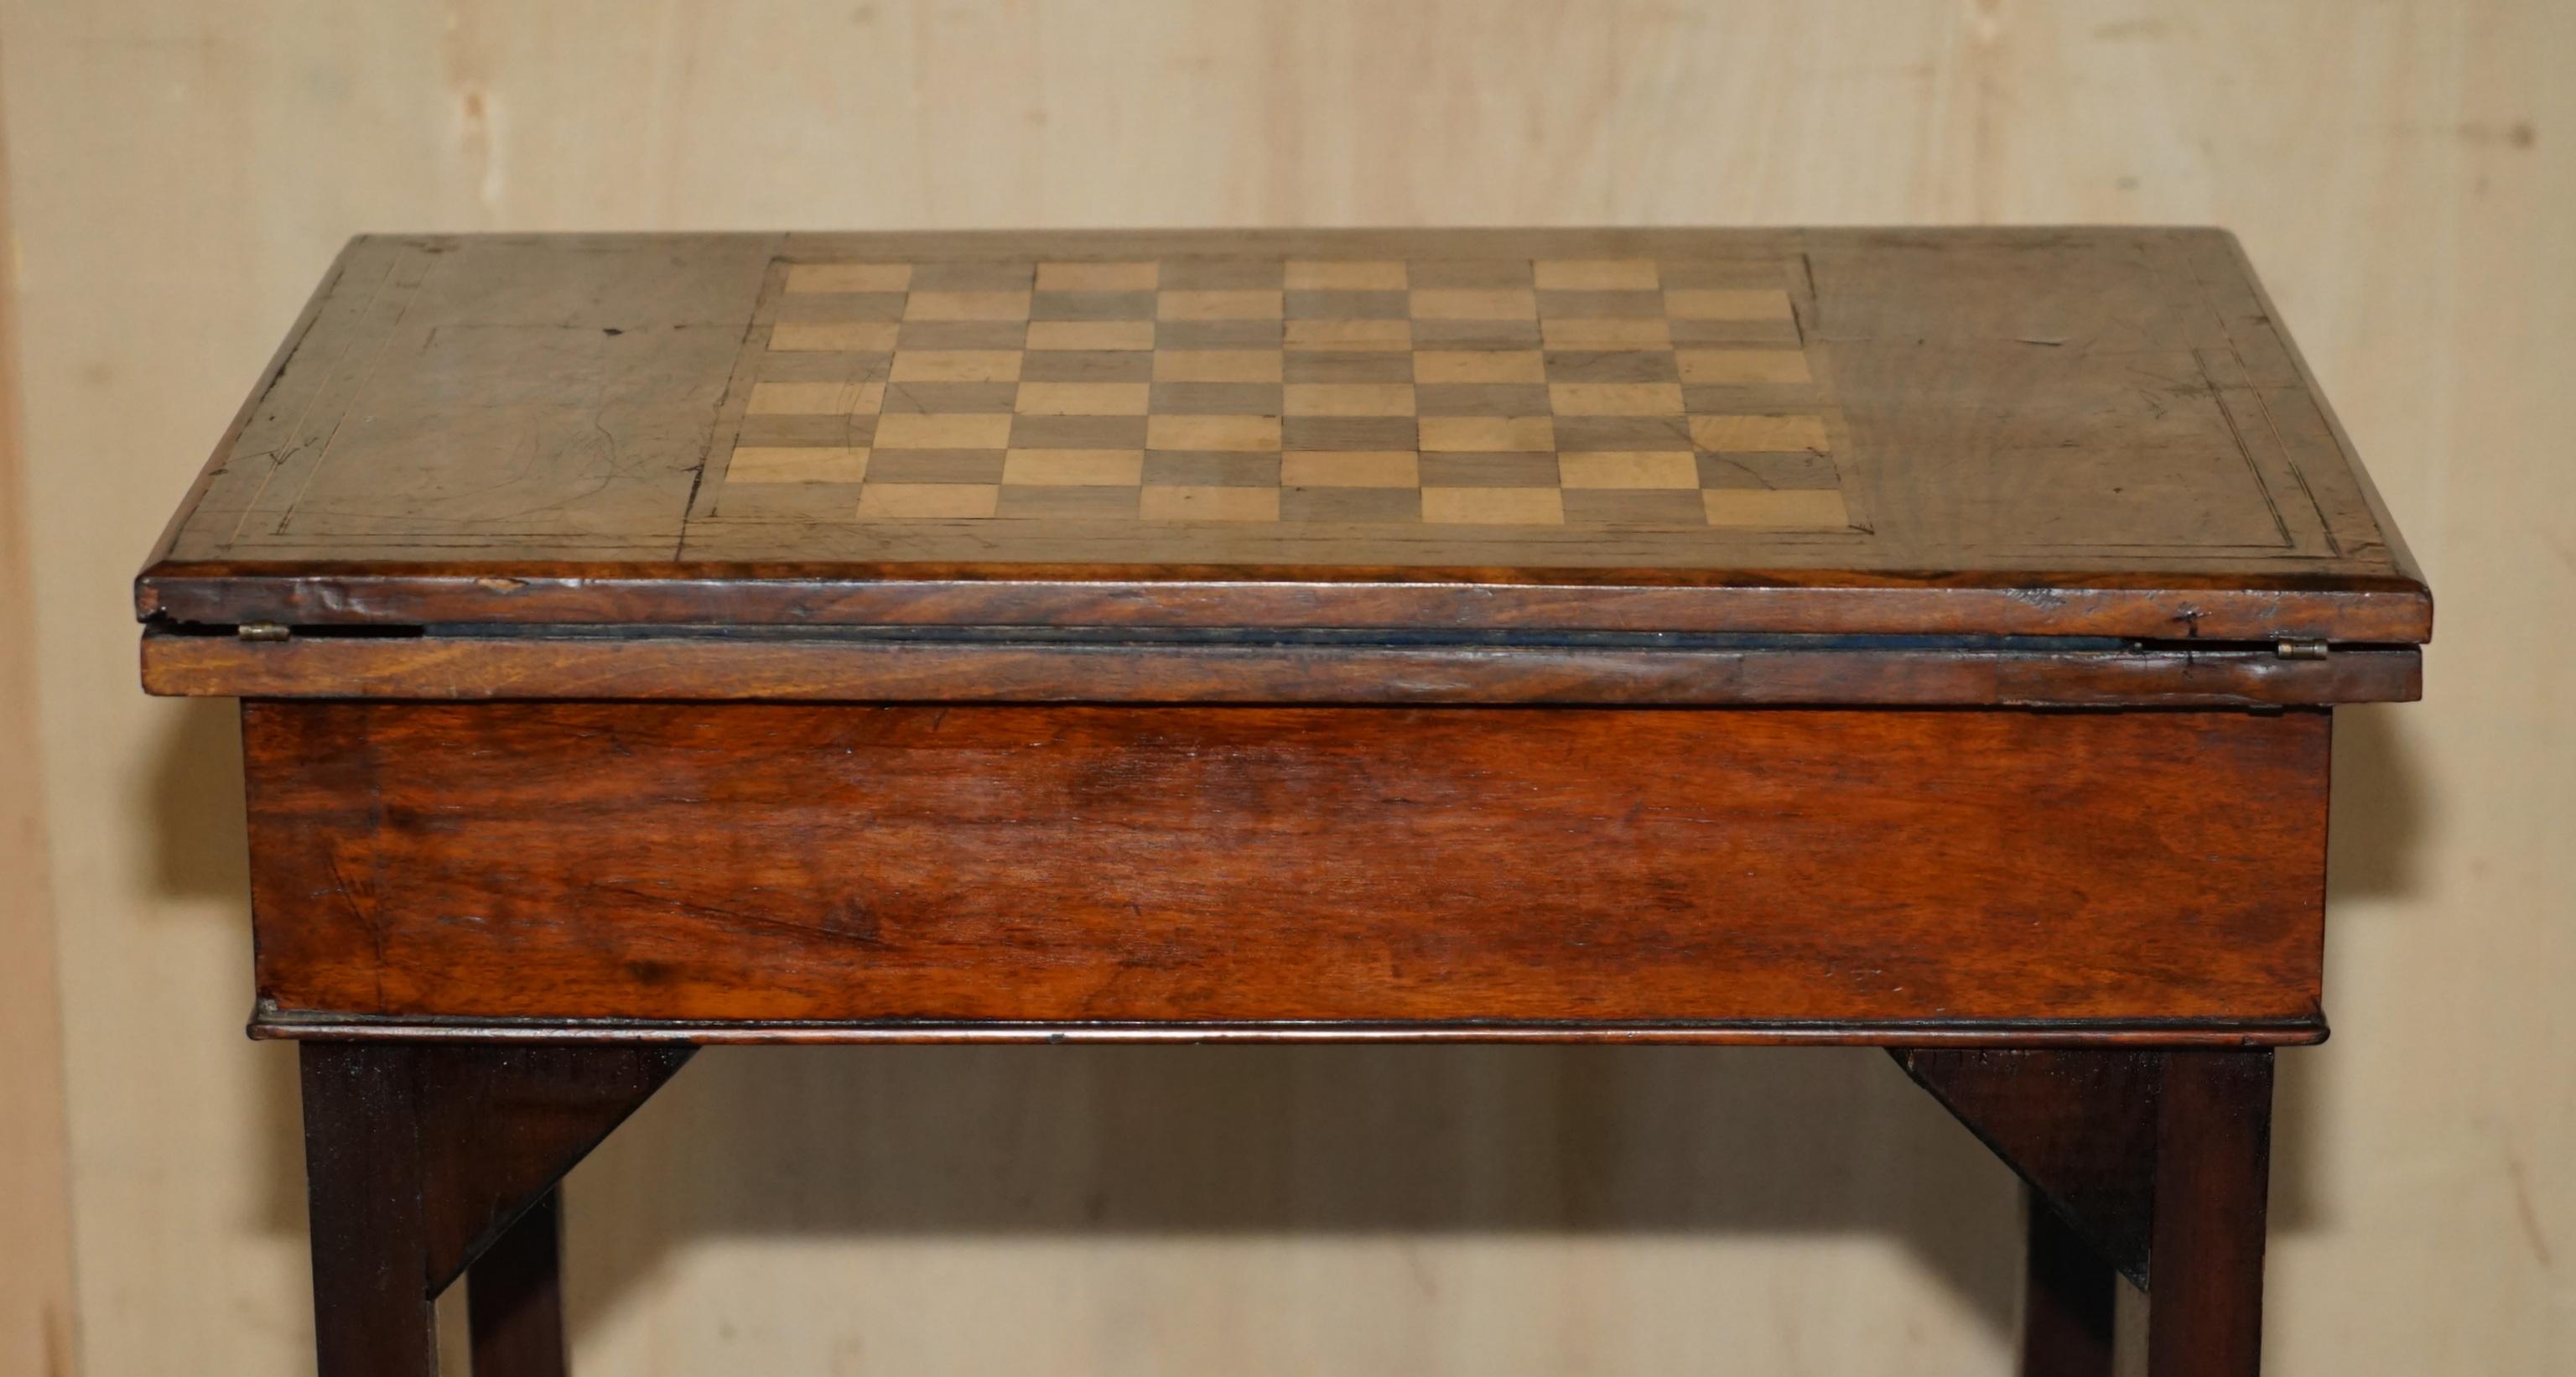 EXQUISITE WALNUT SATINWOOD & HARDWOOD ANTIQUE ViCTORIAN CHESSBOARD GAMES TABLE For Sale 5